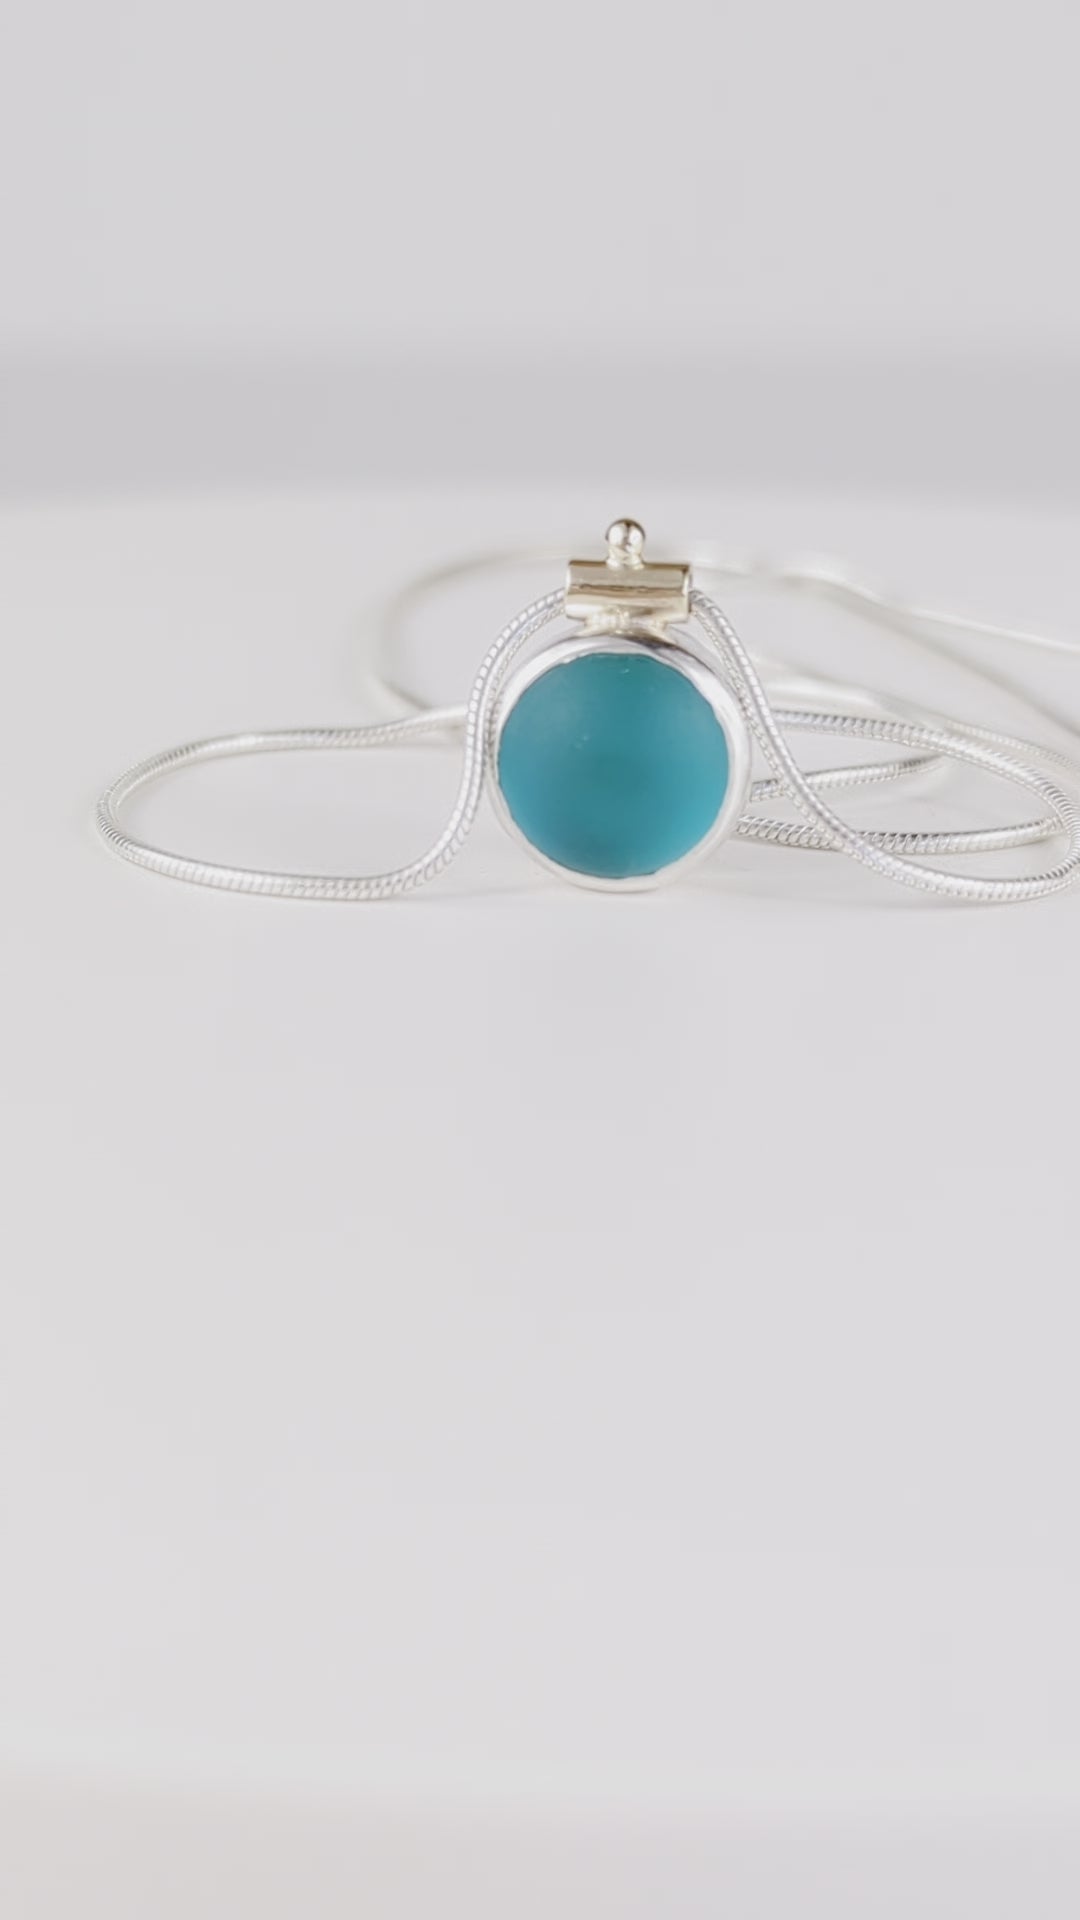 video of spinning deep teal sea glass necklace with gold bail detail and silver snake chain